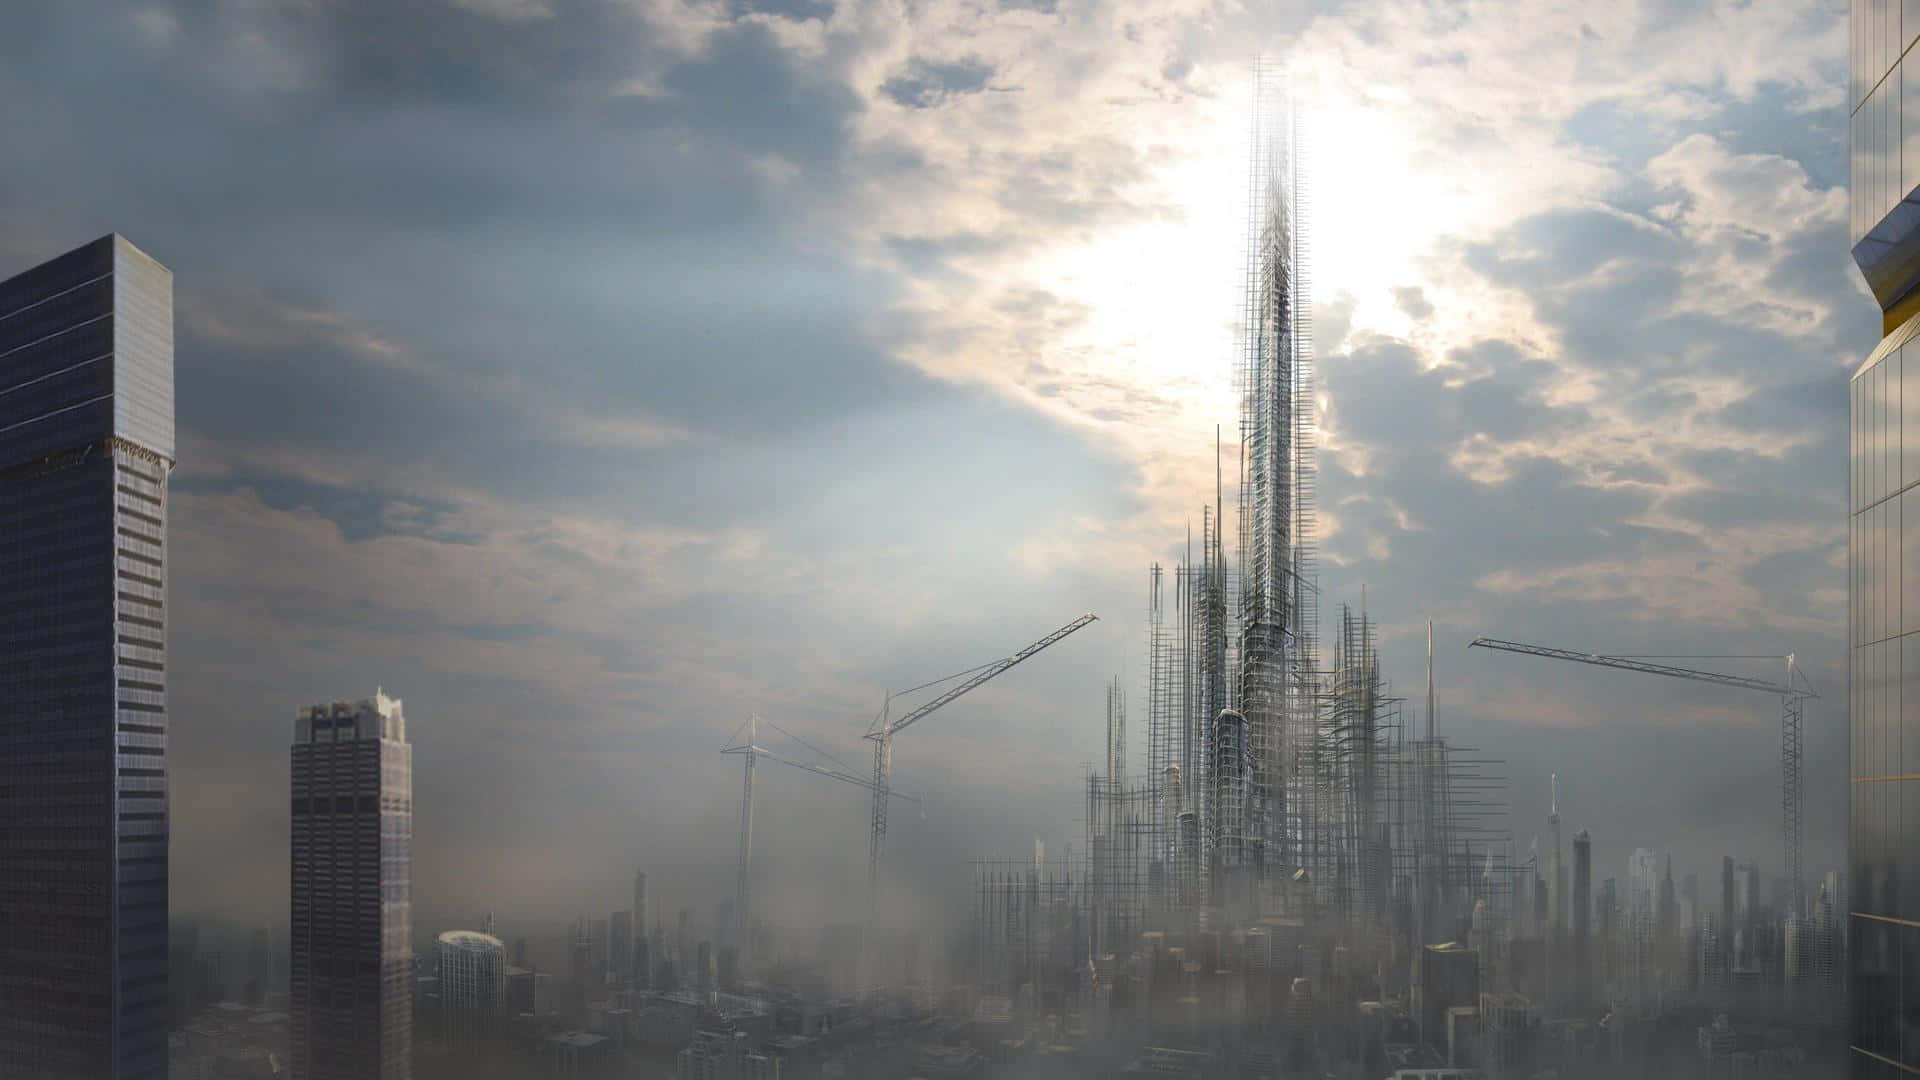 A City With A Tall Building In The Sky